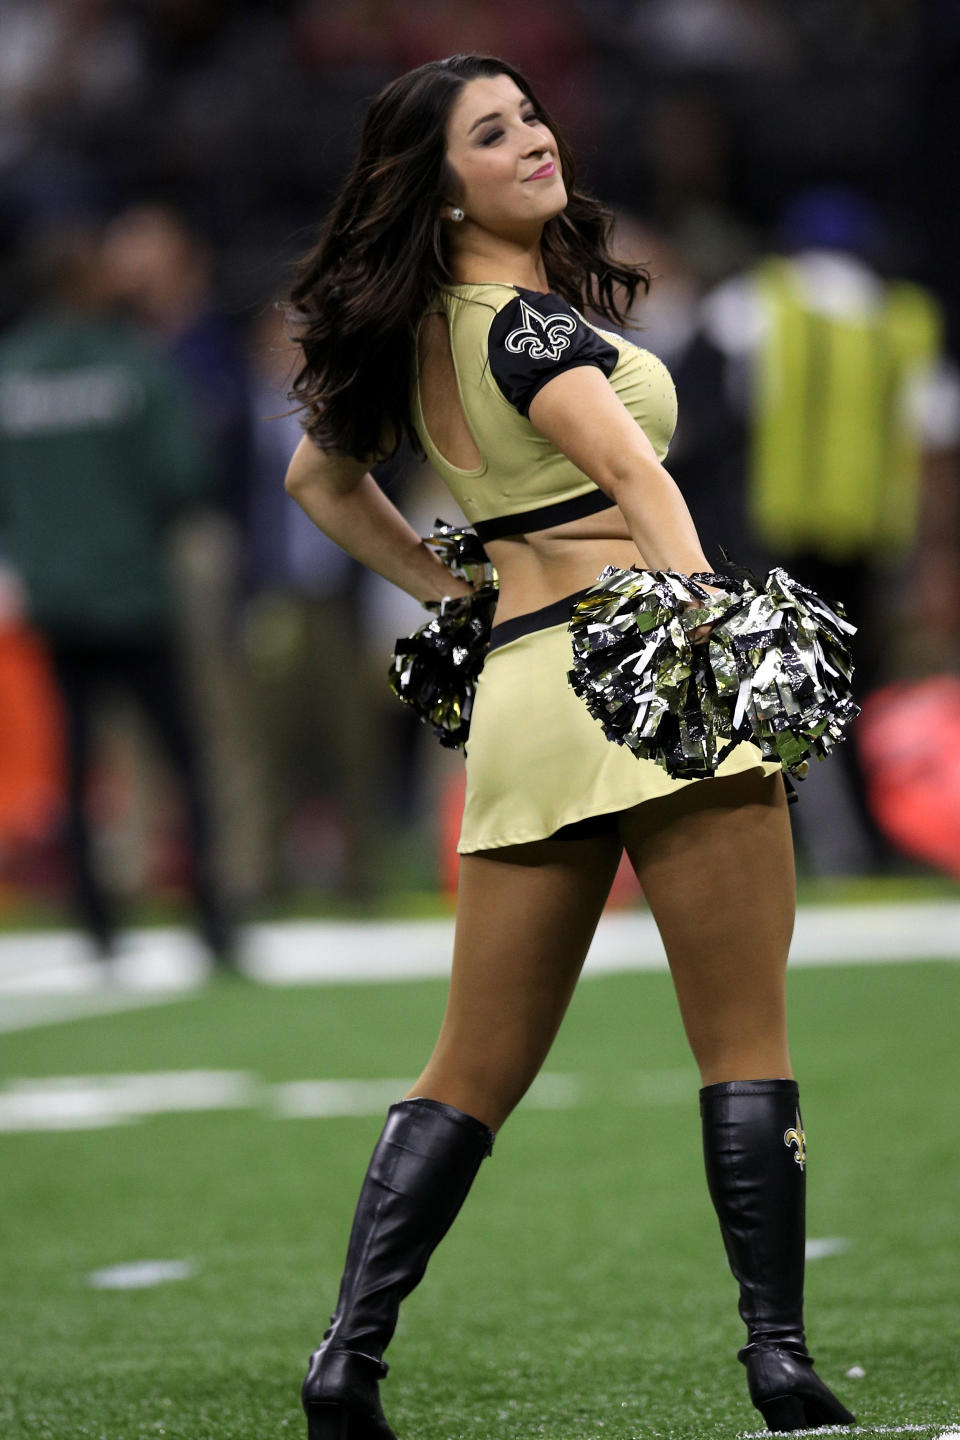 <p>Saintsation cheerleaders perform at the Mercedes-Benz Superdome on September 17, 2017 in New Orleans, Louisiana. (Photo by Chris Graythen/Getty Images) </p>